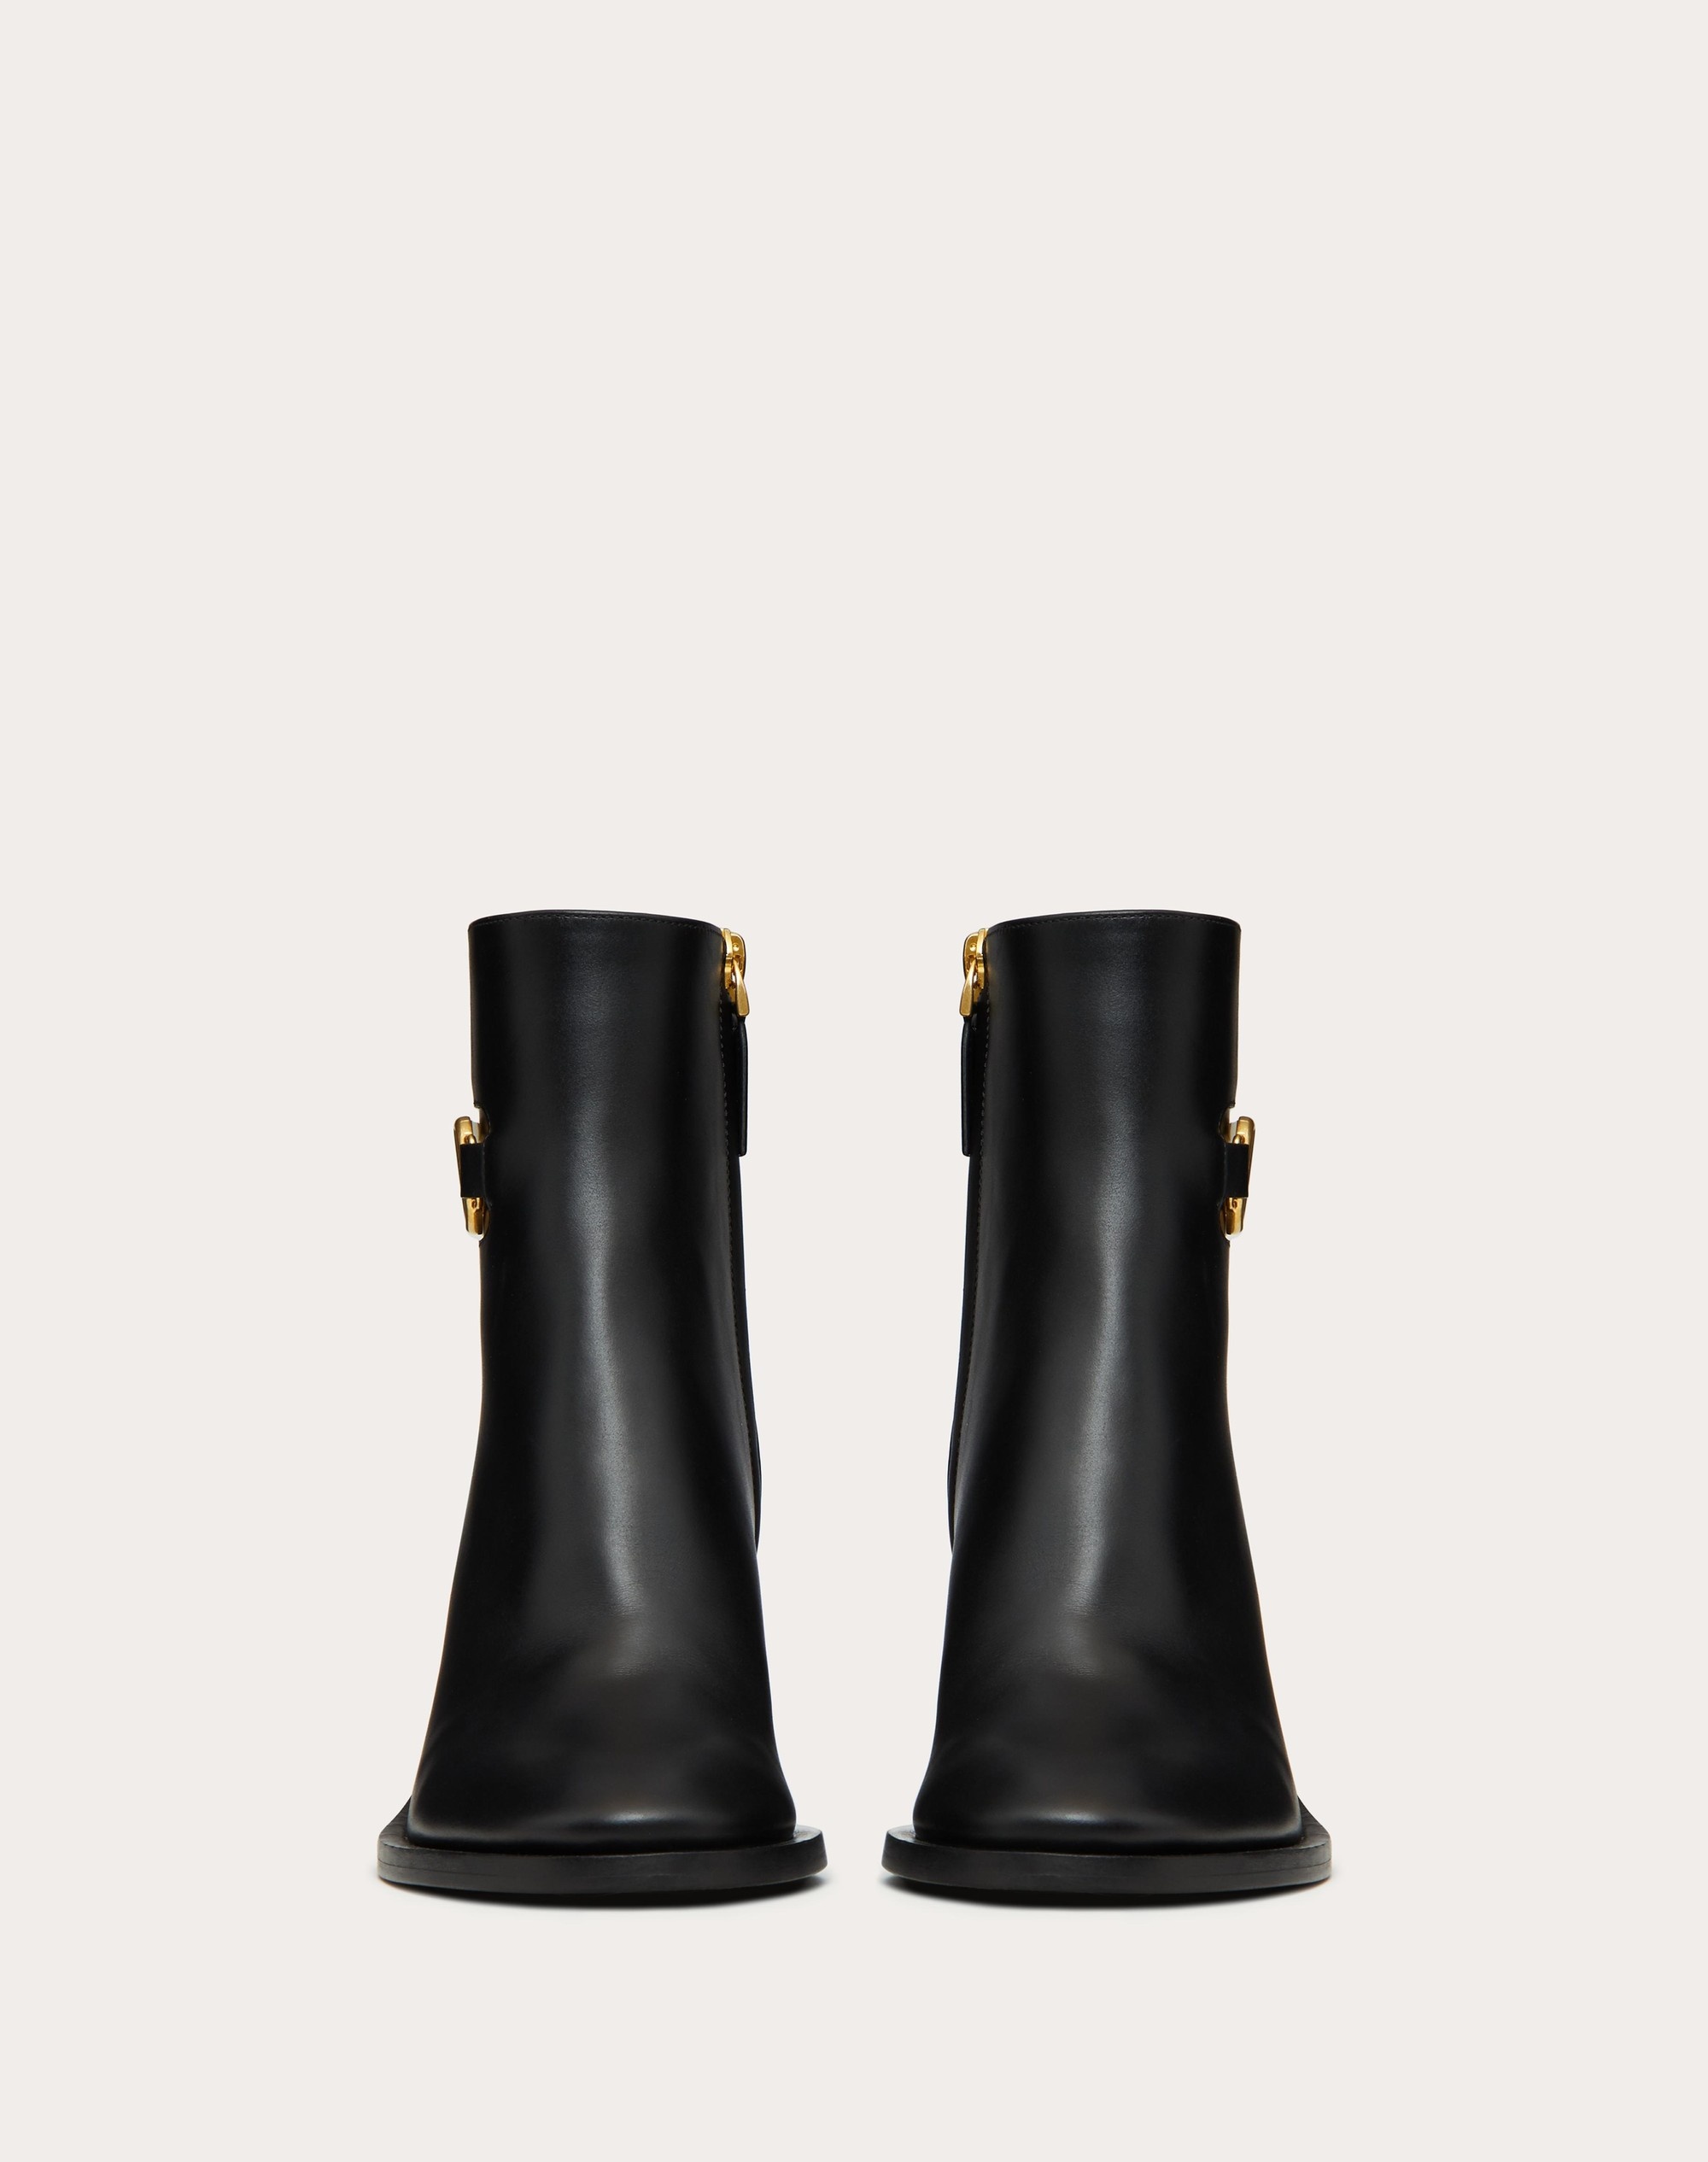 VLOGO SIGNATURE CALFSKIN ANKLE BOOT 75MM - 4